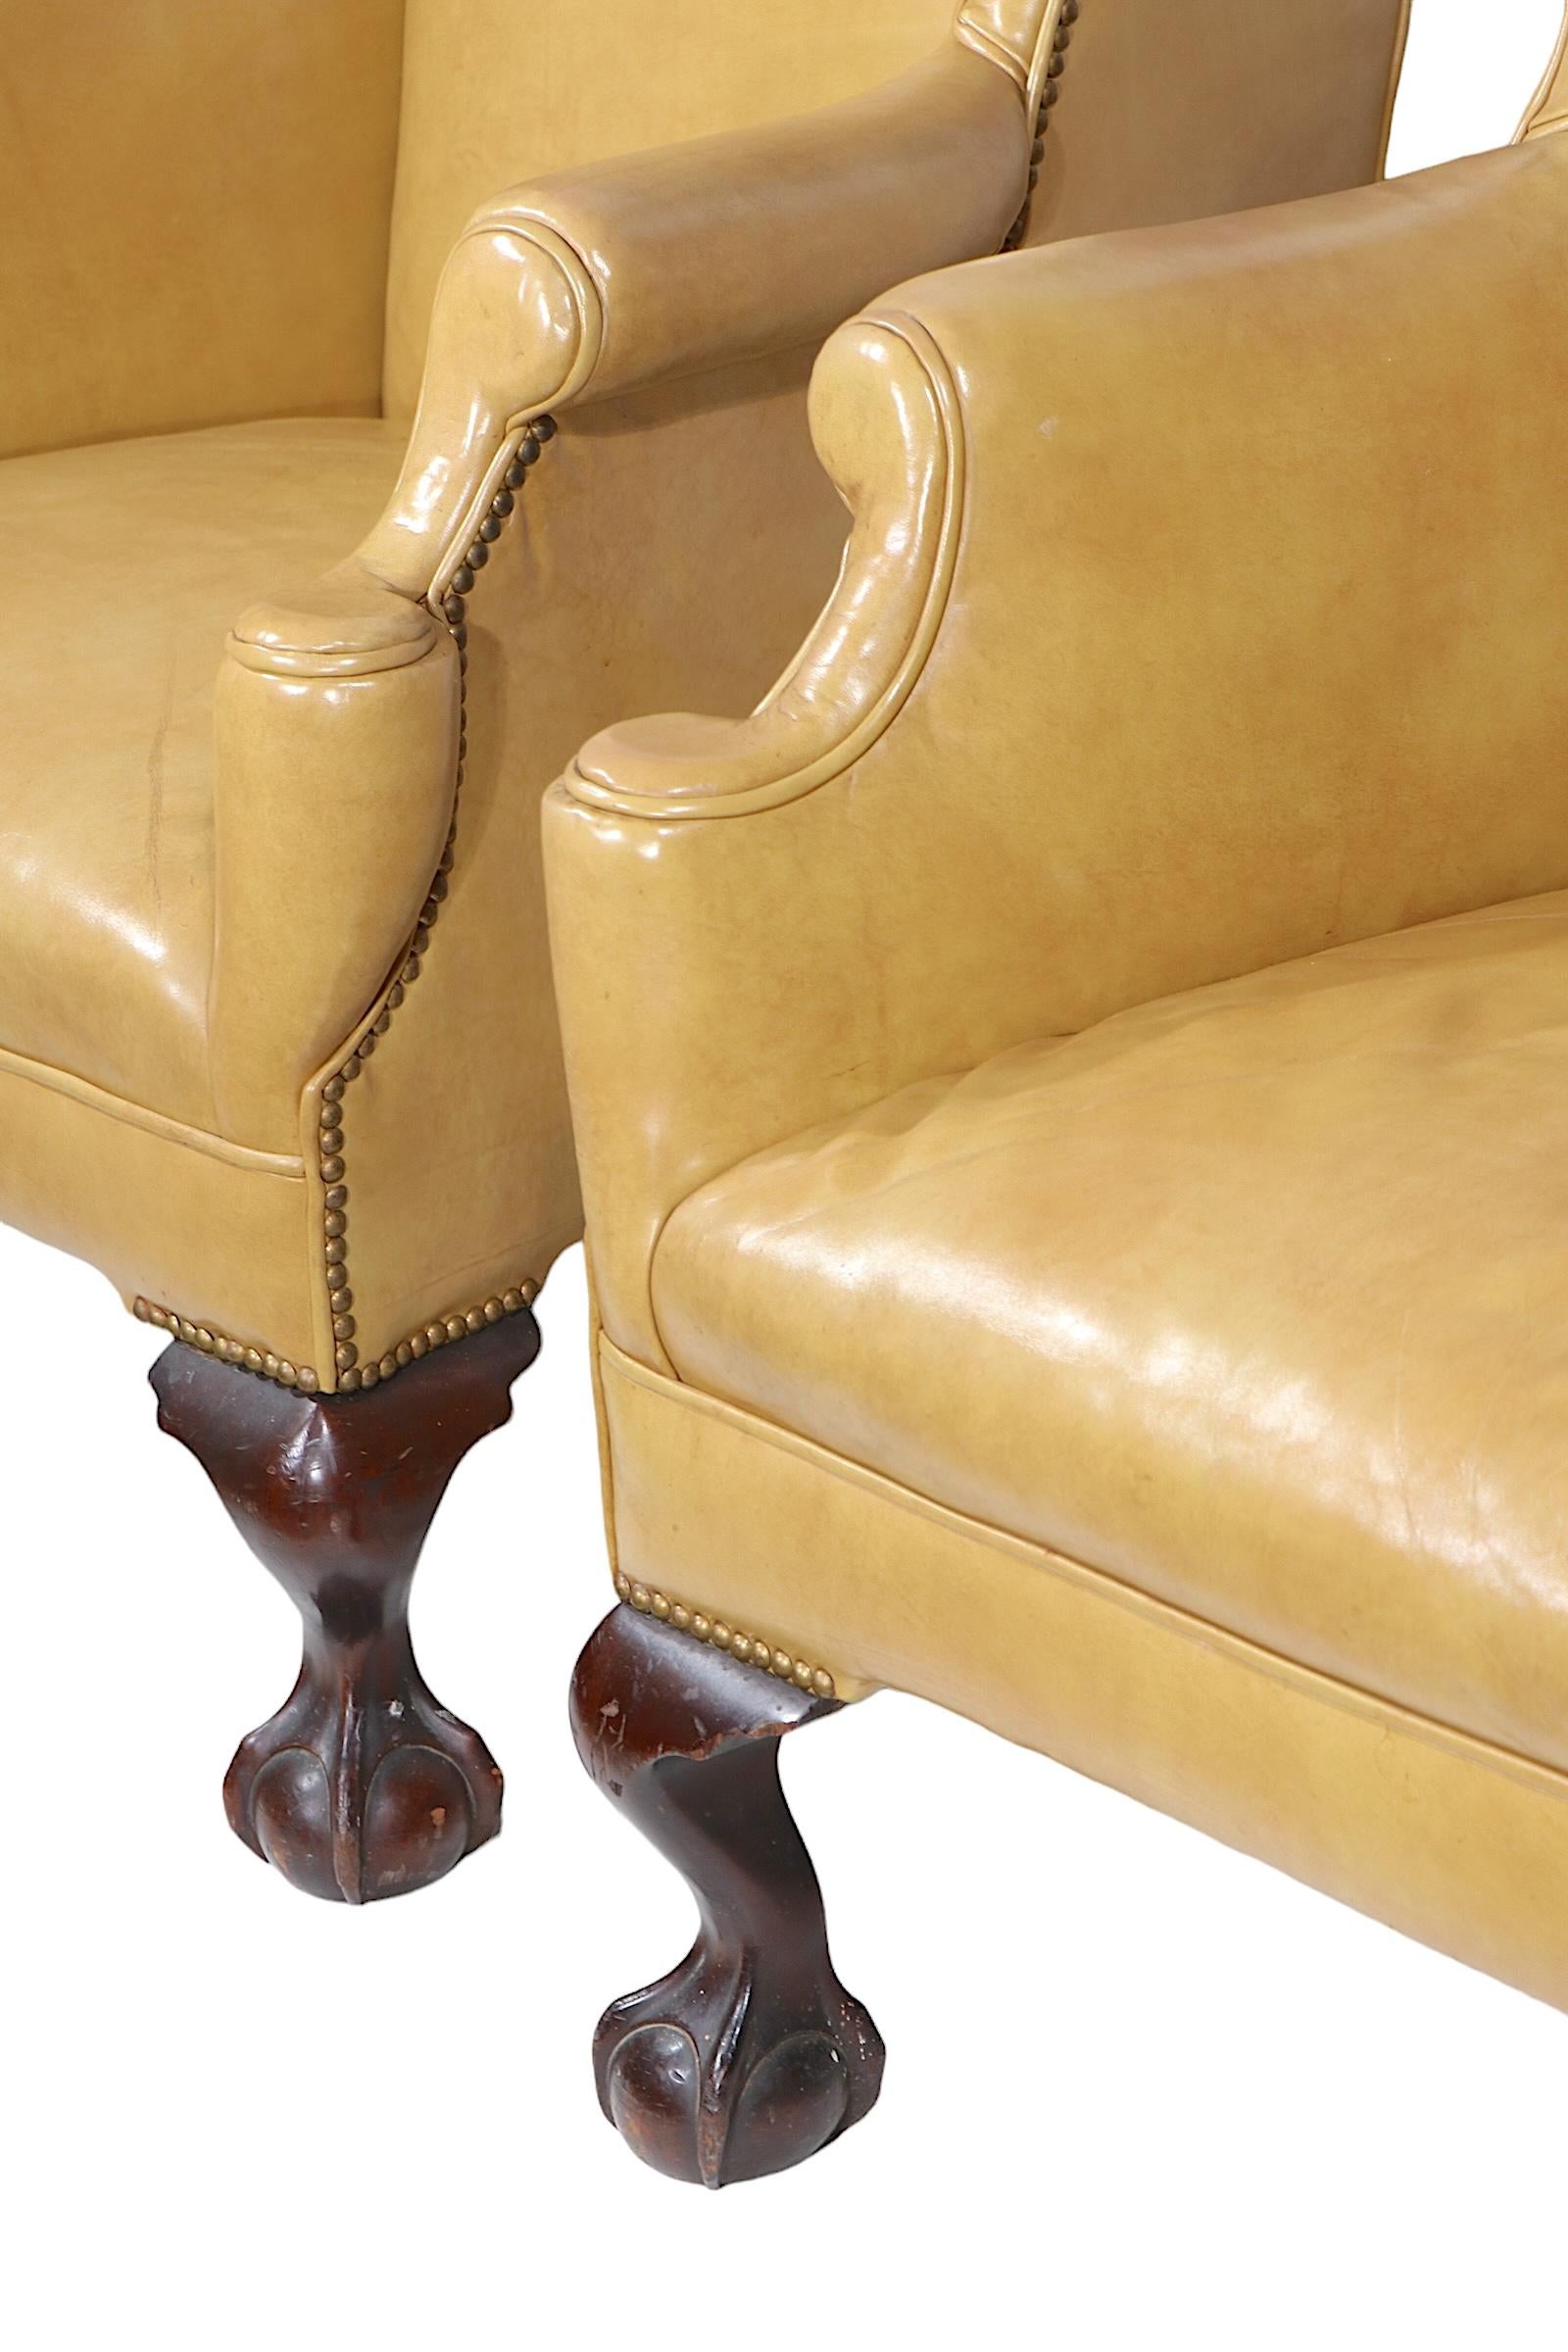 Exceptional pair of wing back chairs, originally from the historic Fort William Henry Hotel, in Lake George NY. The chairs have leather upholstery with decorative nailhead studs, with gutsy ball and claw feet. The chairs are very well crafted,